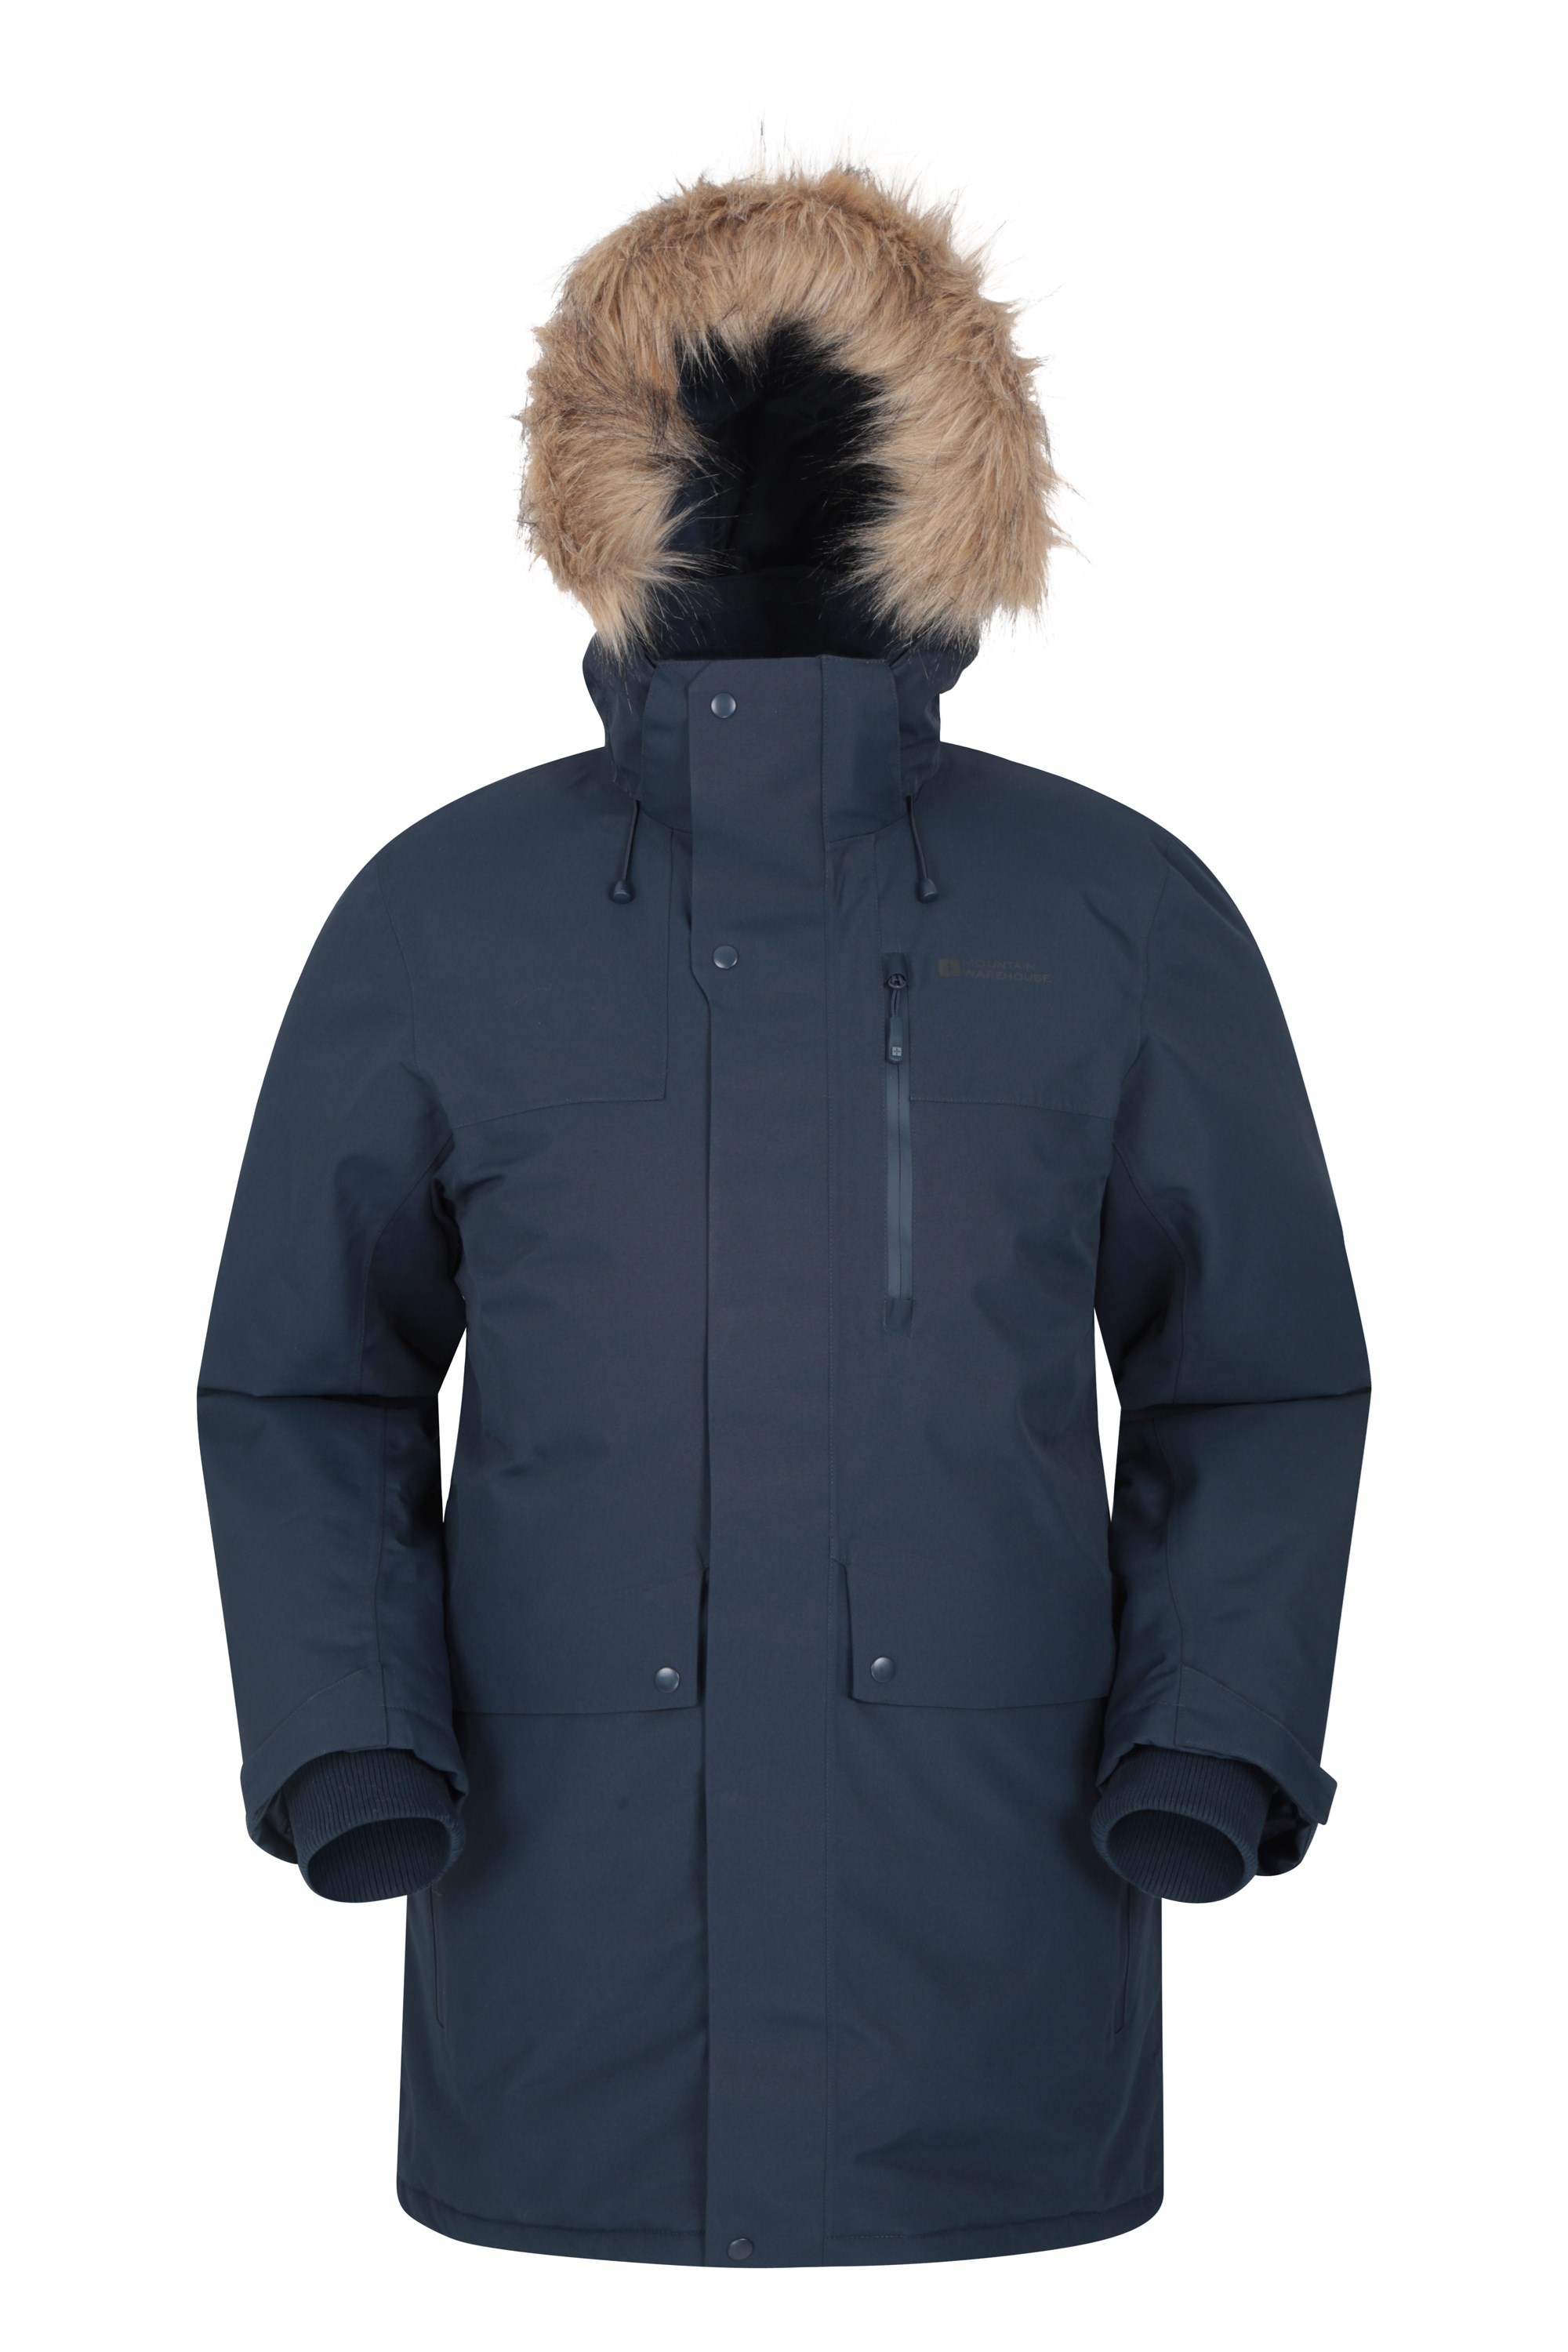 Mountain Warehouse Arne Mens Long Insulated Jacket Navy